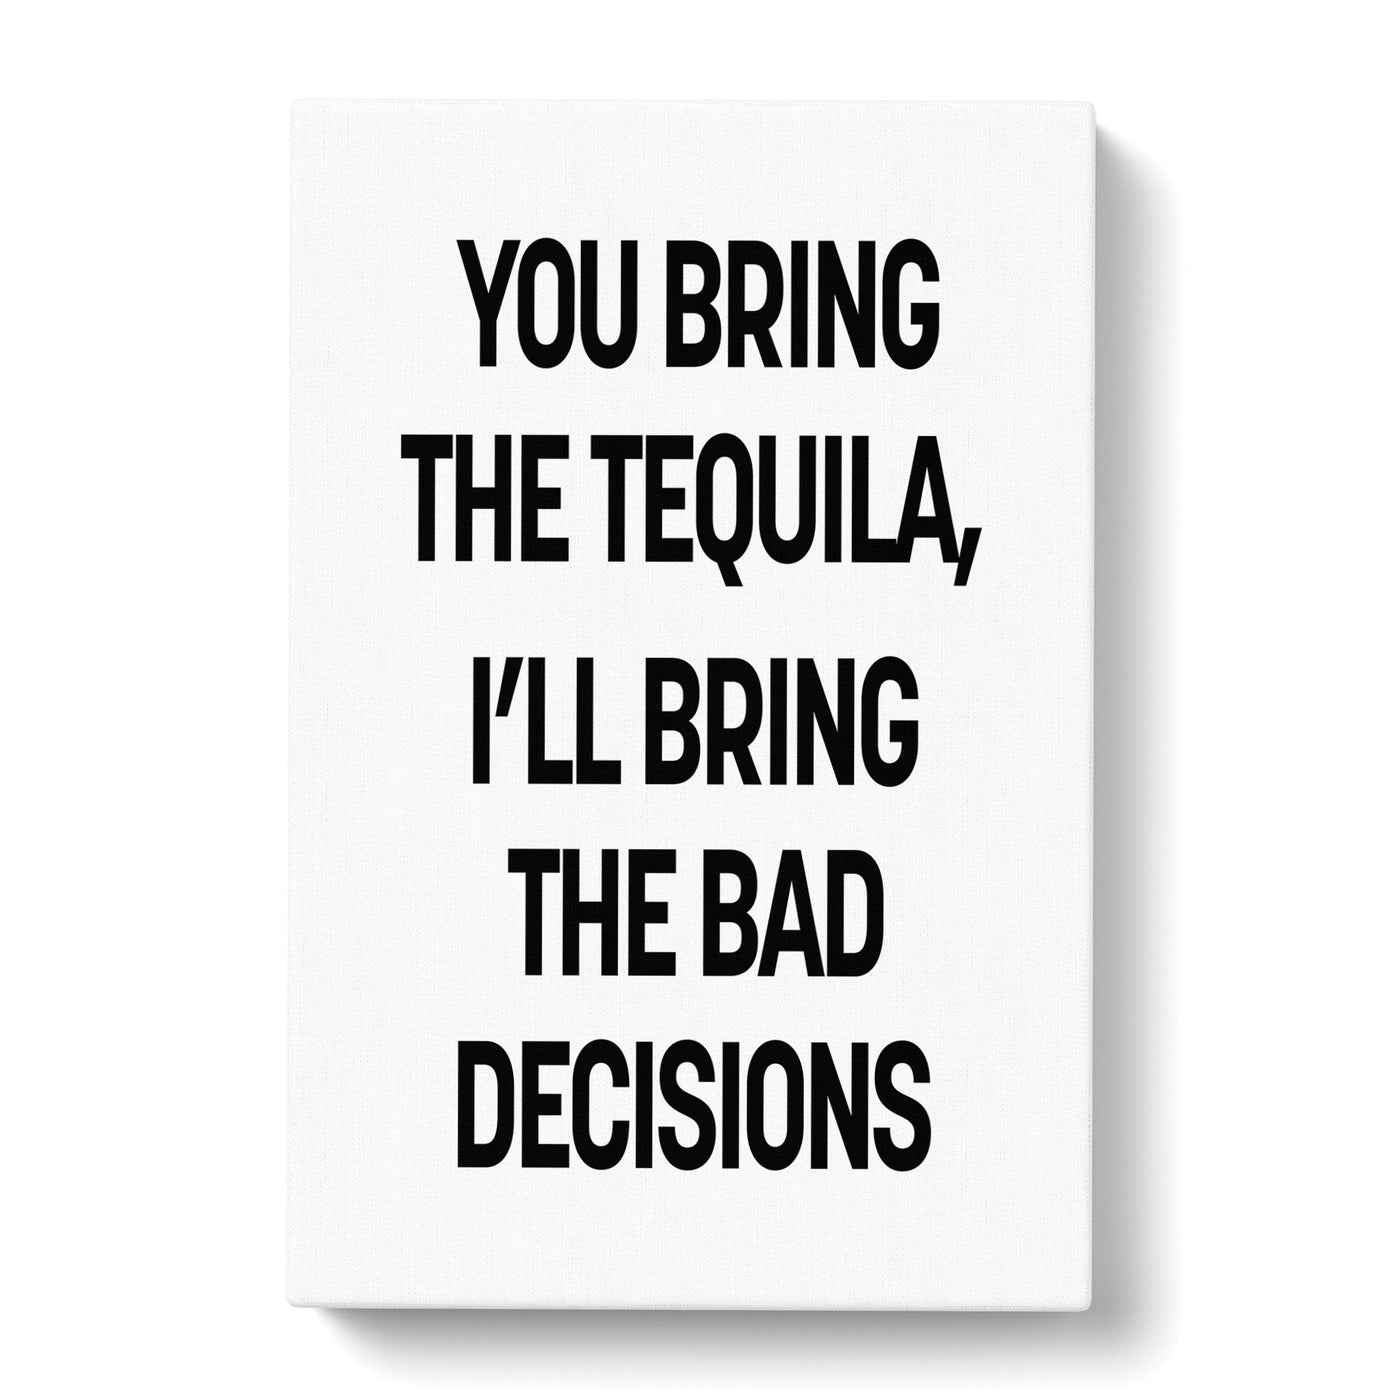 Bring The Tequila Typography Canvas Print Main Image